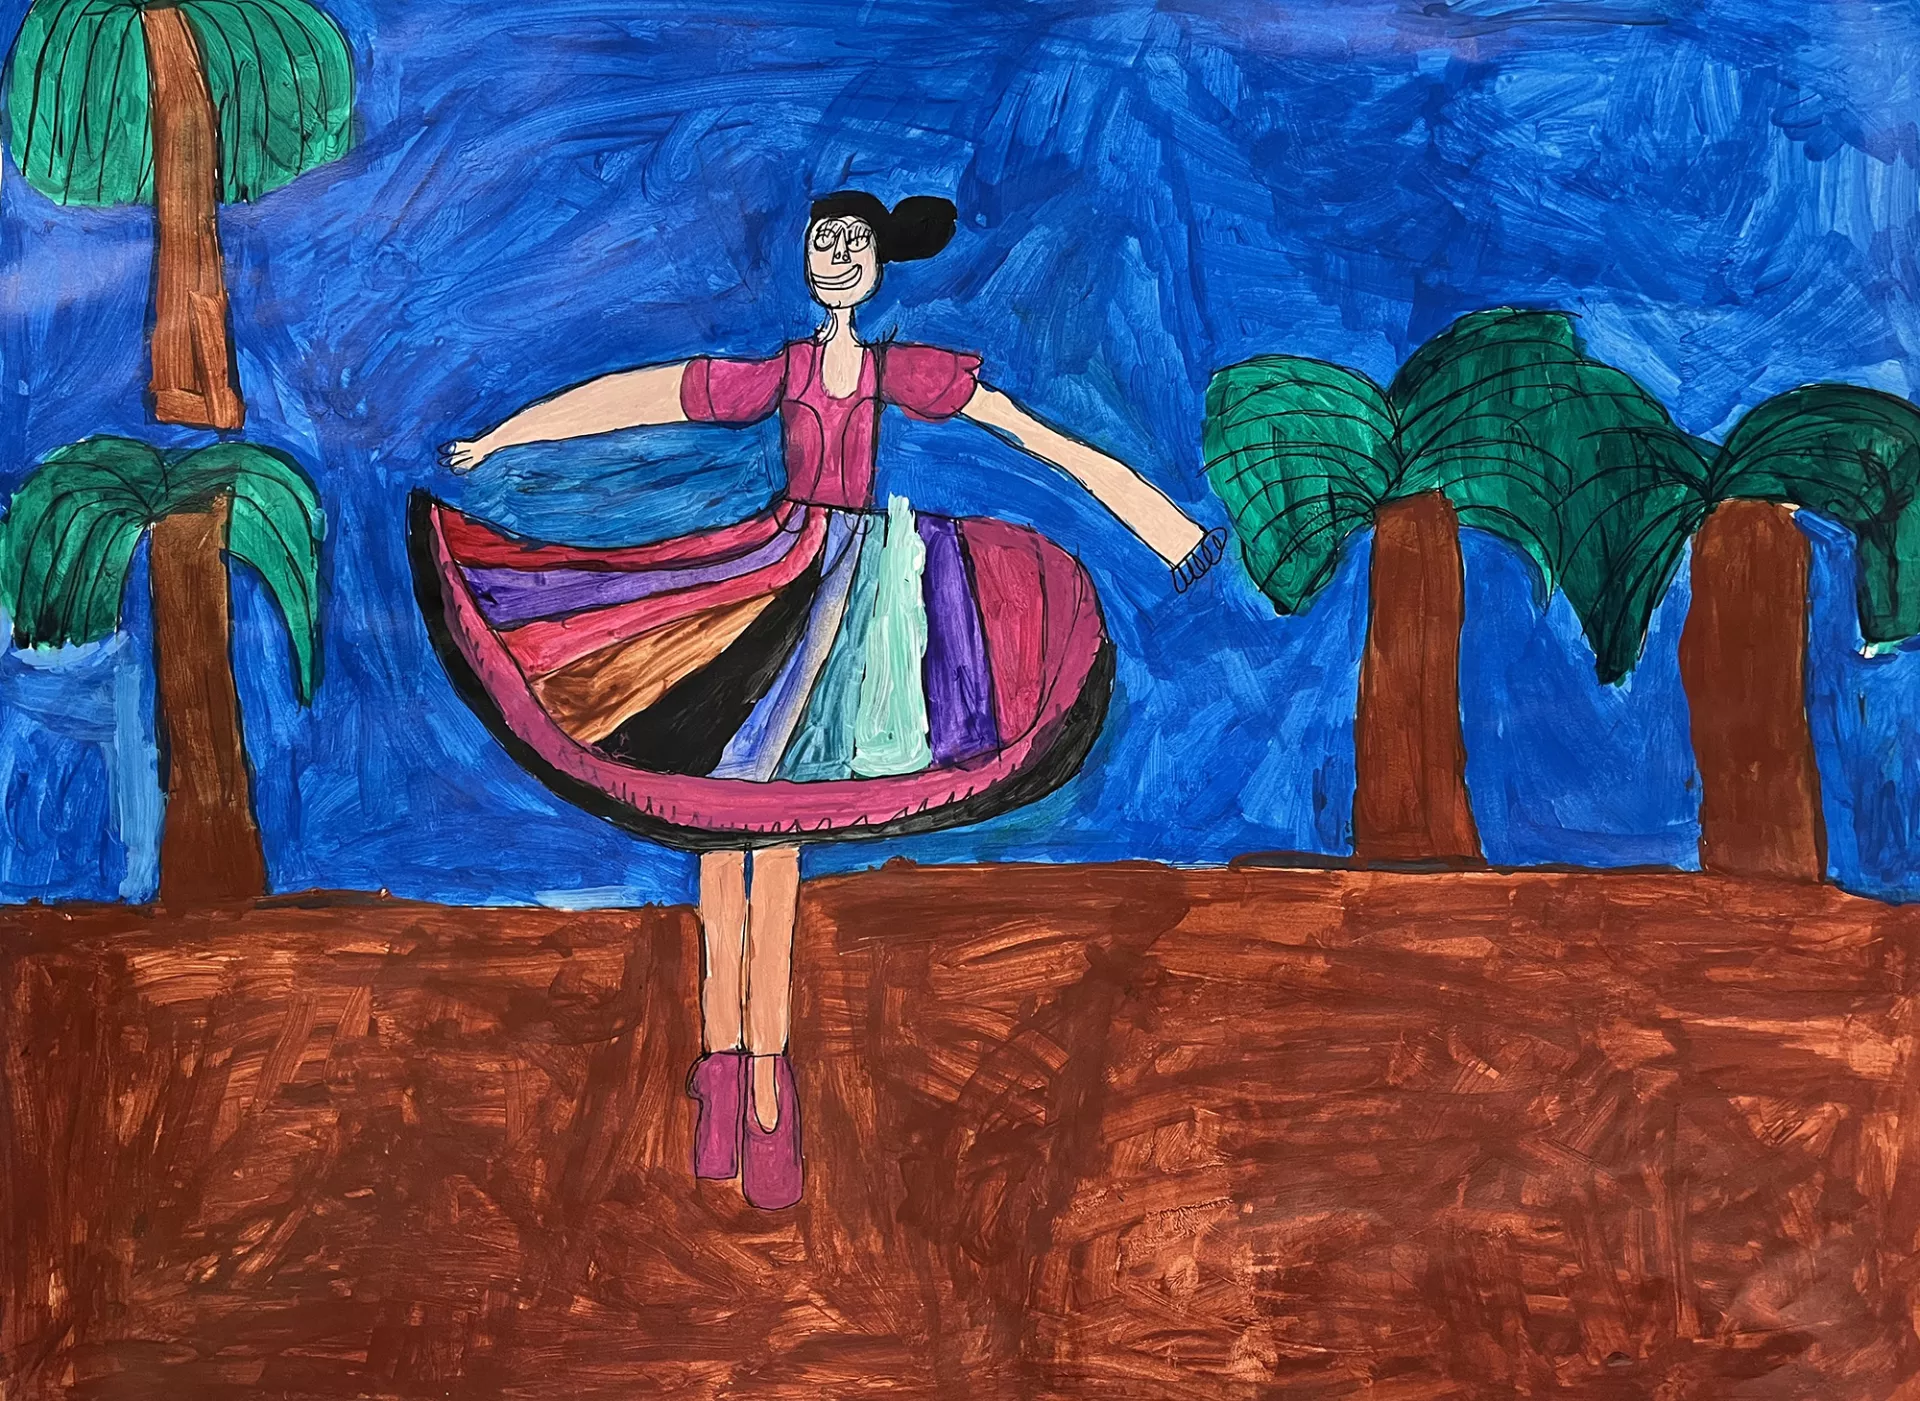 Aracely Ellis Prima Ballerina, 2022 This is a vibrant painting of a dancing ballerina. The ballerina appears to be both still and in motion as her posture is straight and her skirt is flying up and spinning around her. Behind the dancer are four thick palm trees and a dark blue sky.  Acrylic on paper, 18” x 24”